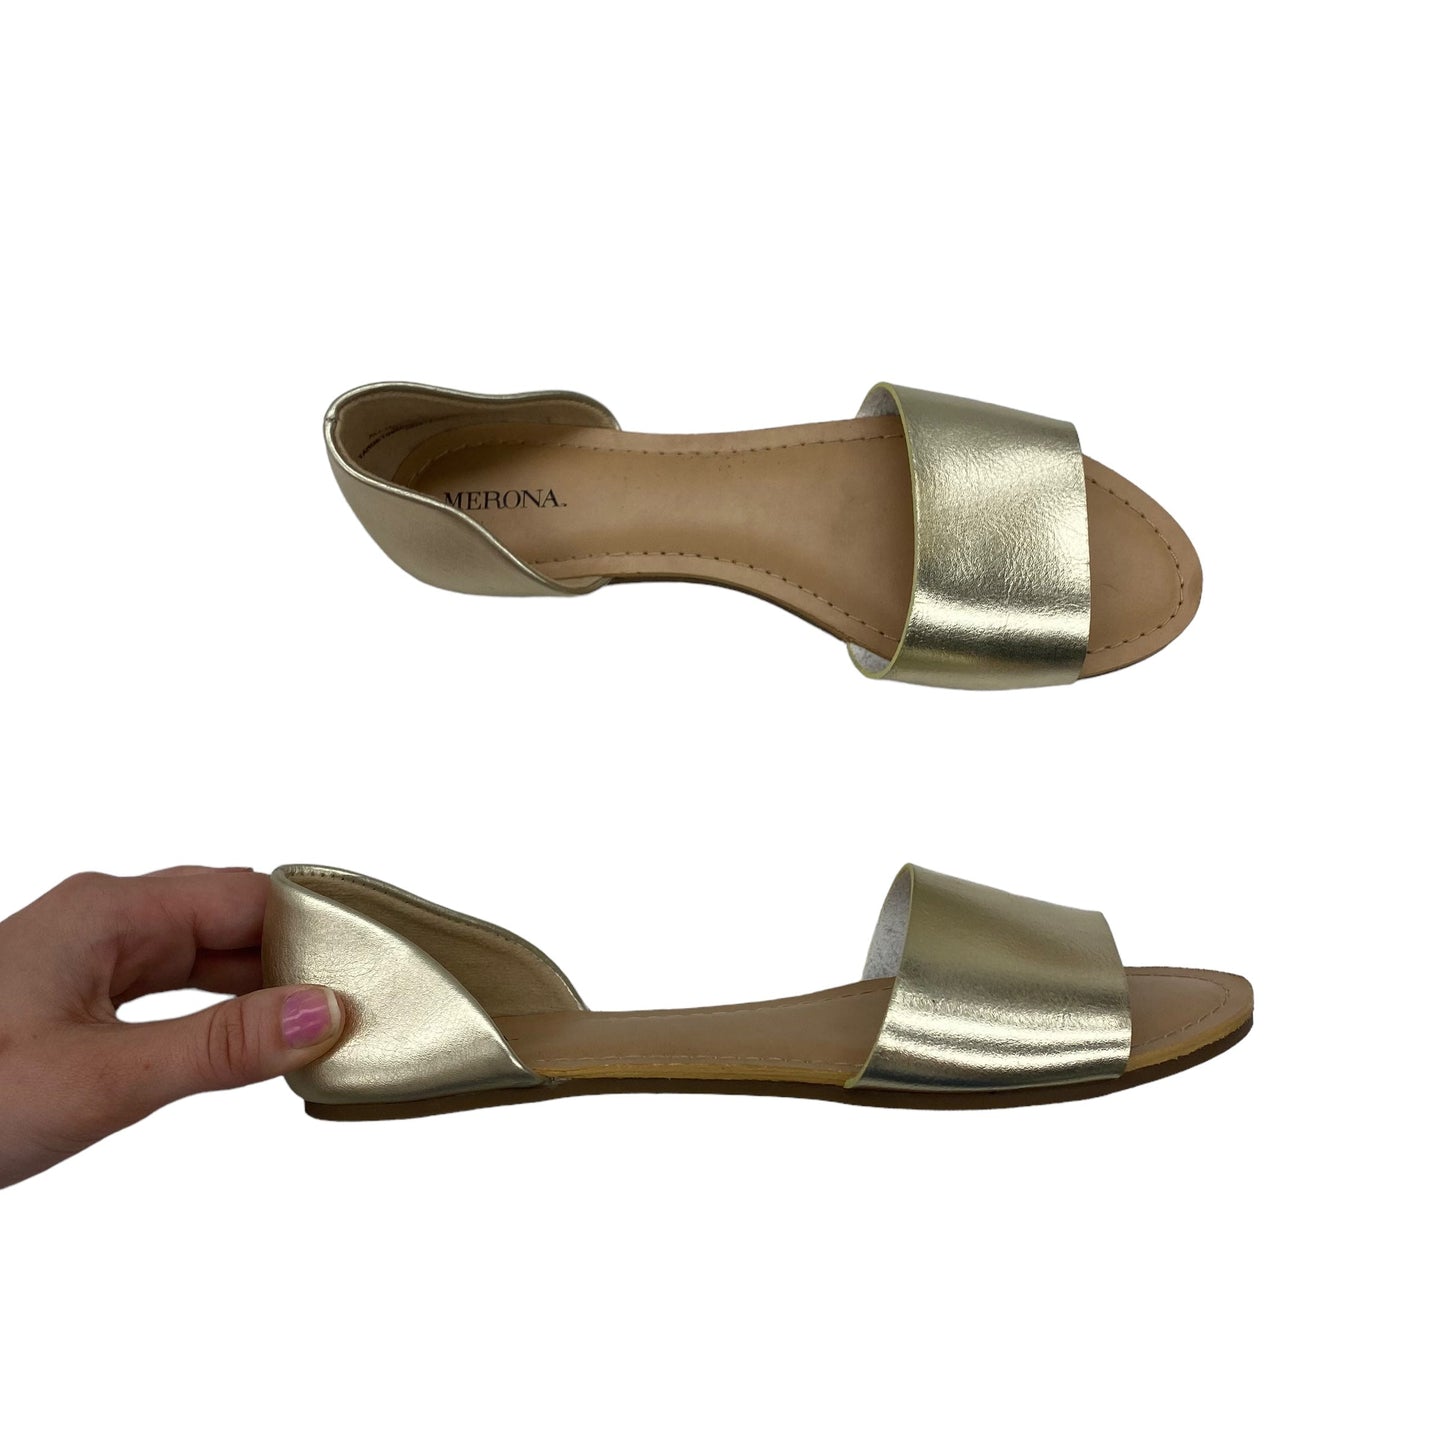 Sandals Flats By Merona  Size: 7.5